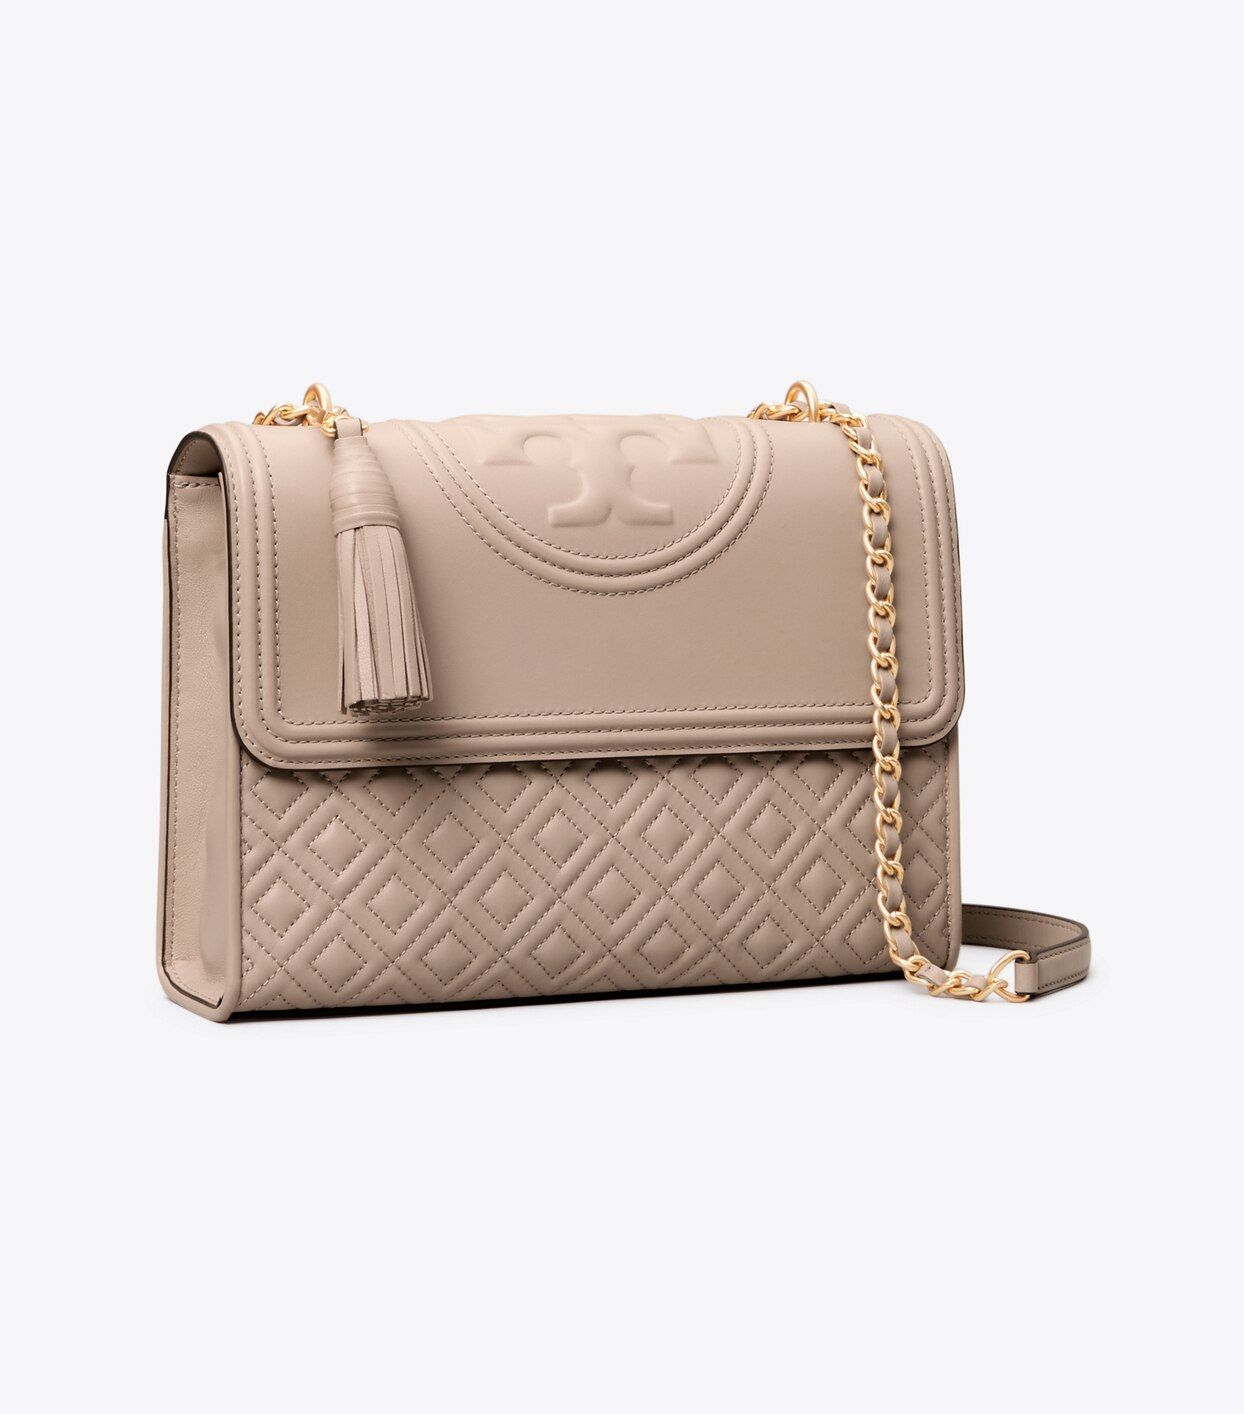 Fleming Convertible Shoulder Bag$498383colorlight taupeIn StockAdd to BagFind in StoreFree standa... | Tory Burch (US)